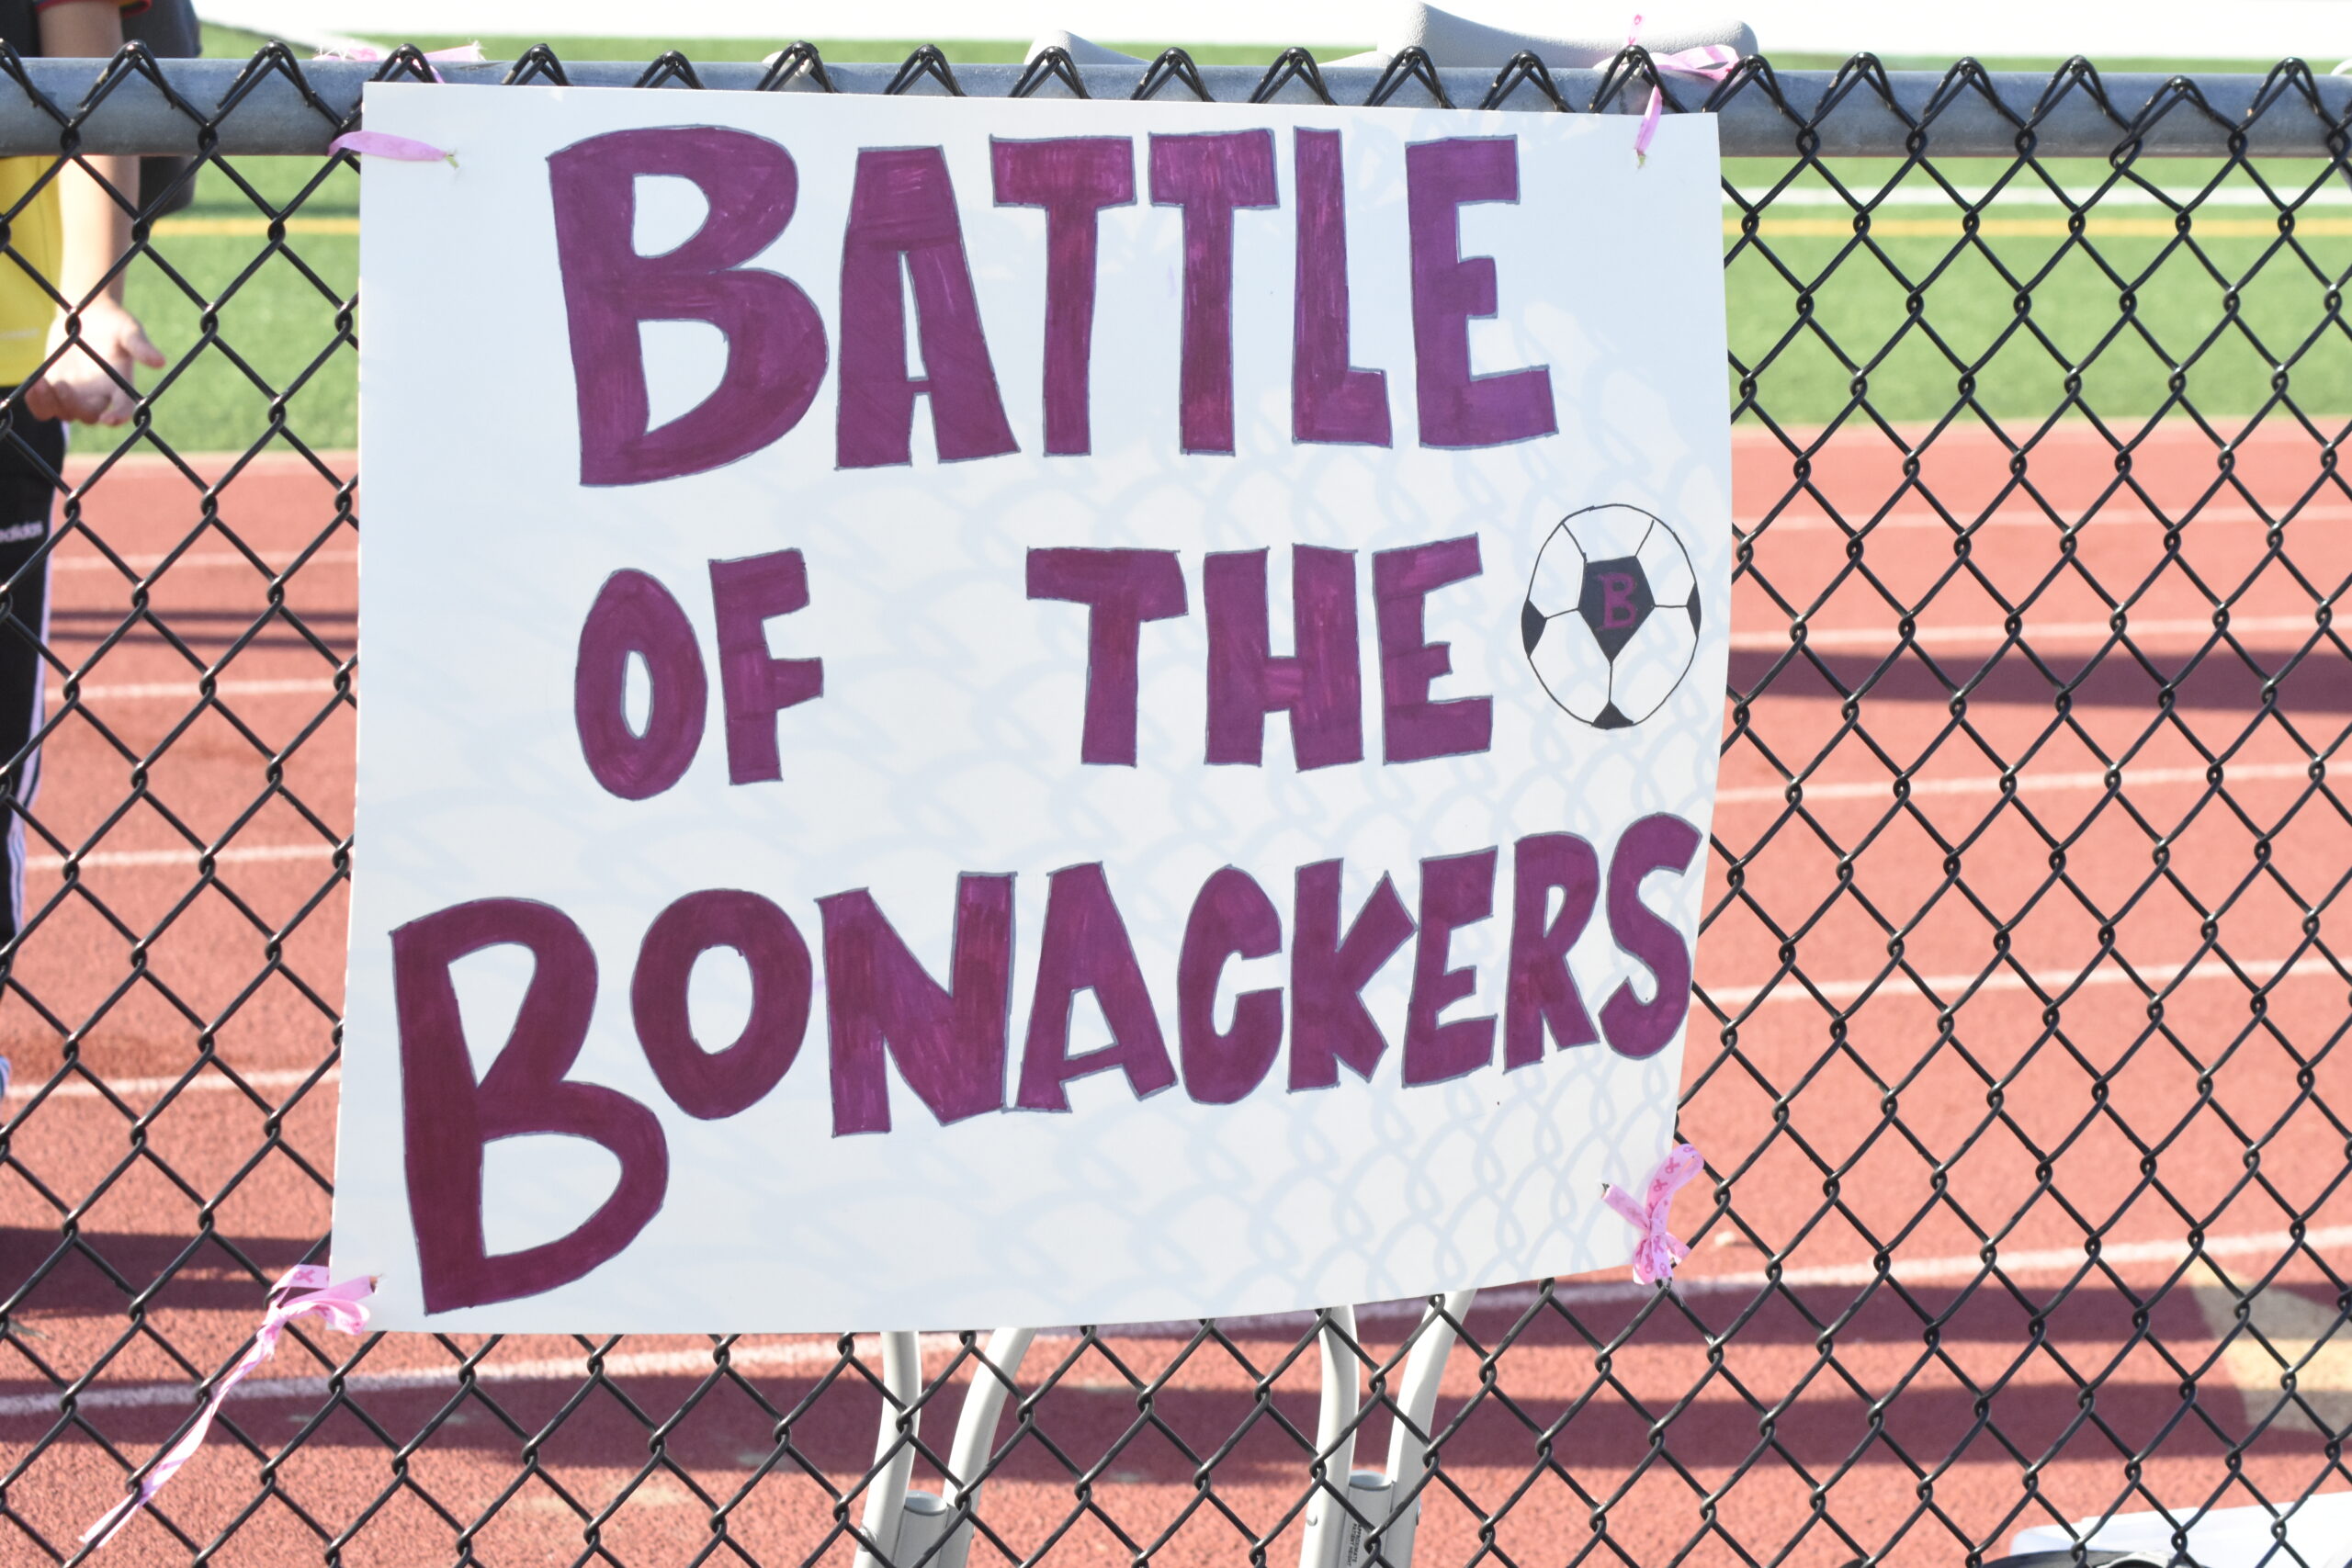 The East Hampton girls soccer program hosted the second annual Battle of the Bonackers, a charity event that raises funds for Kicks For Cancer.   DREW BUDD